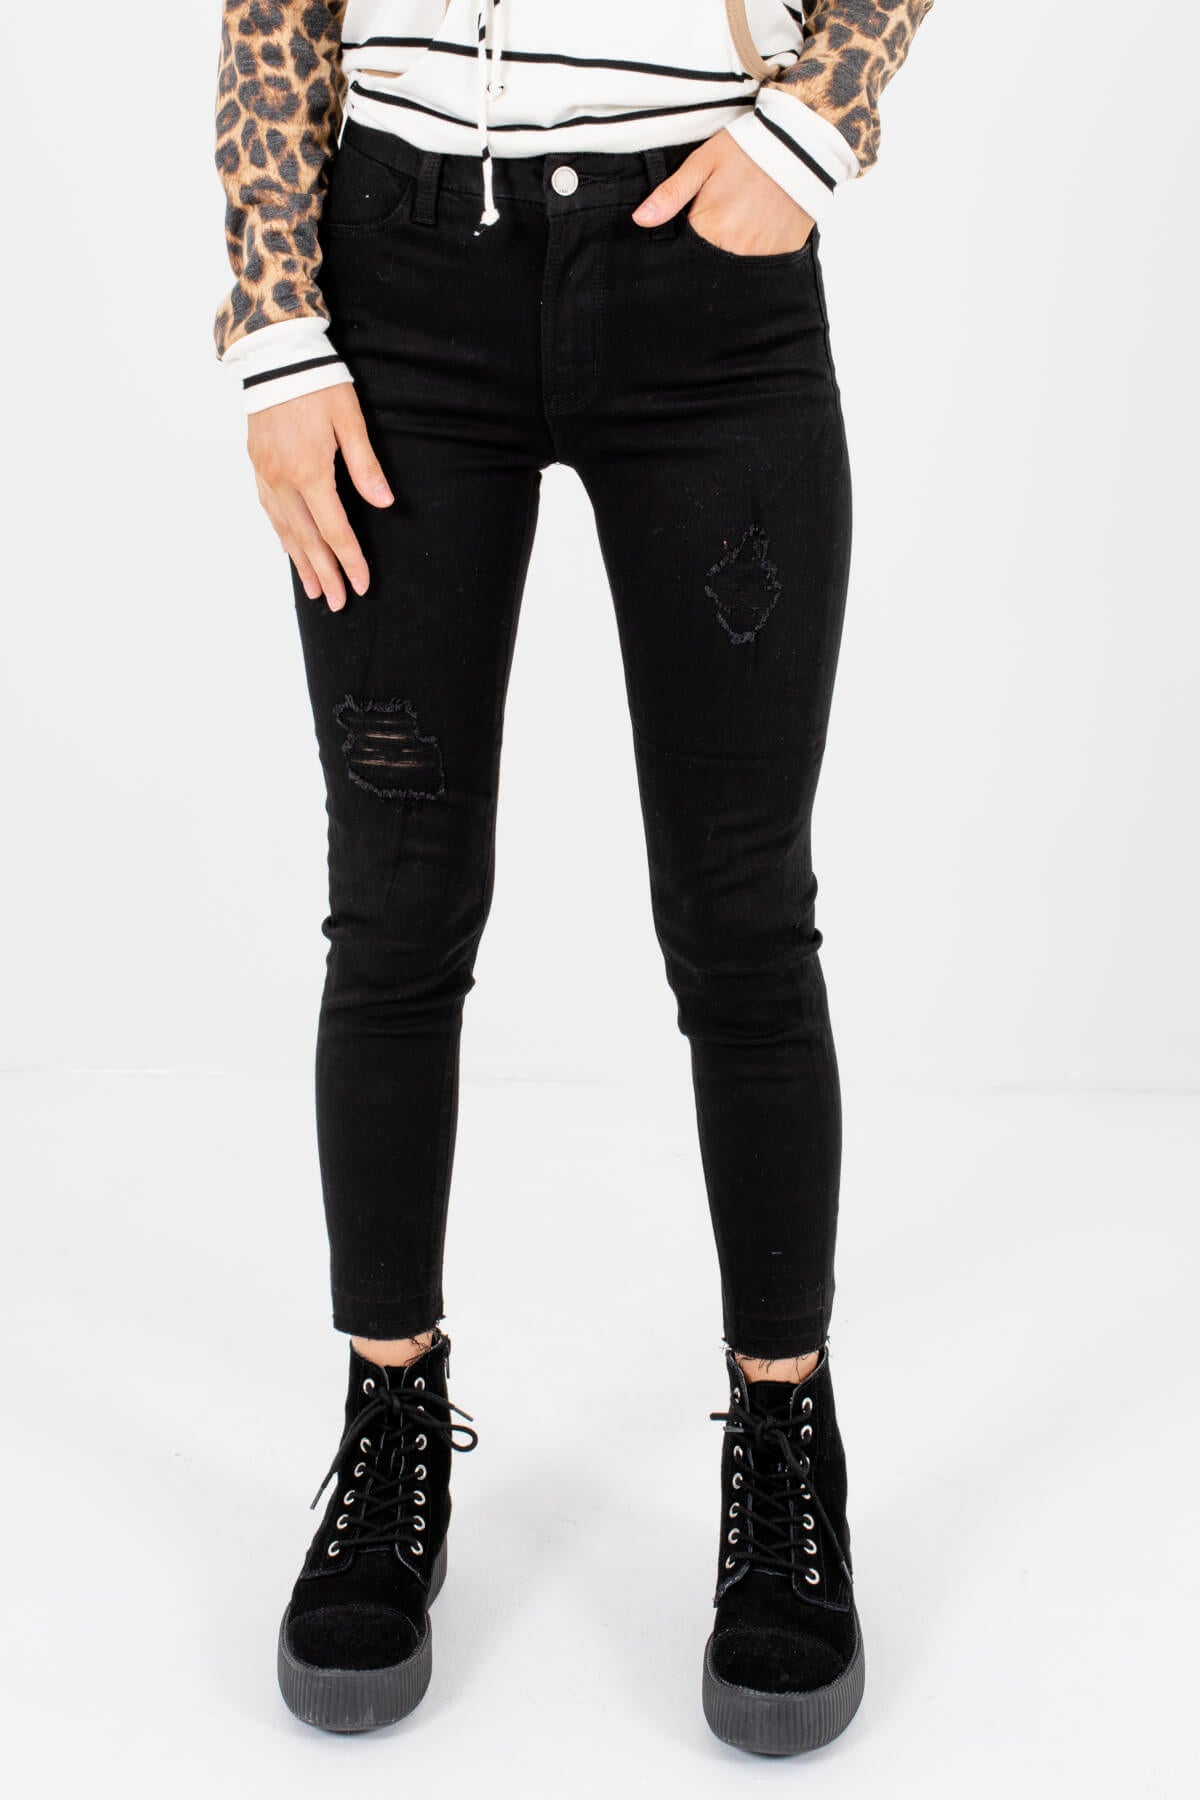 Black Skinny Style Boutique Jeans for Women